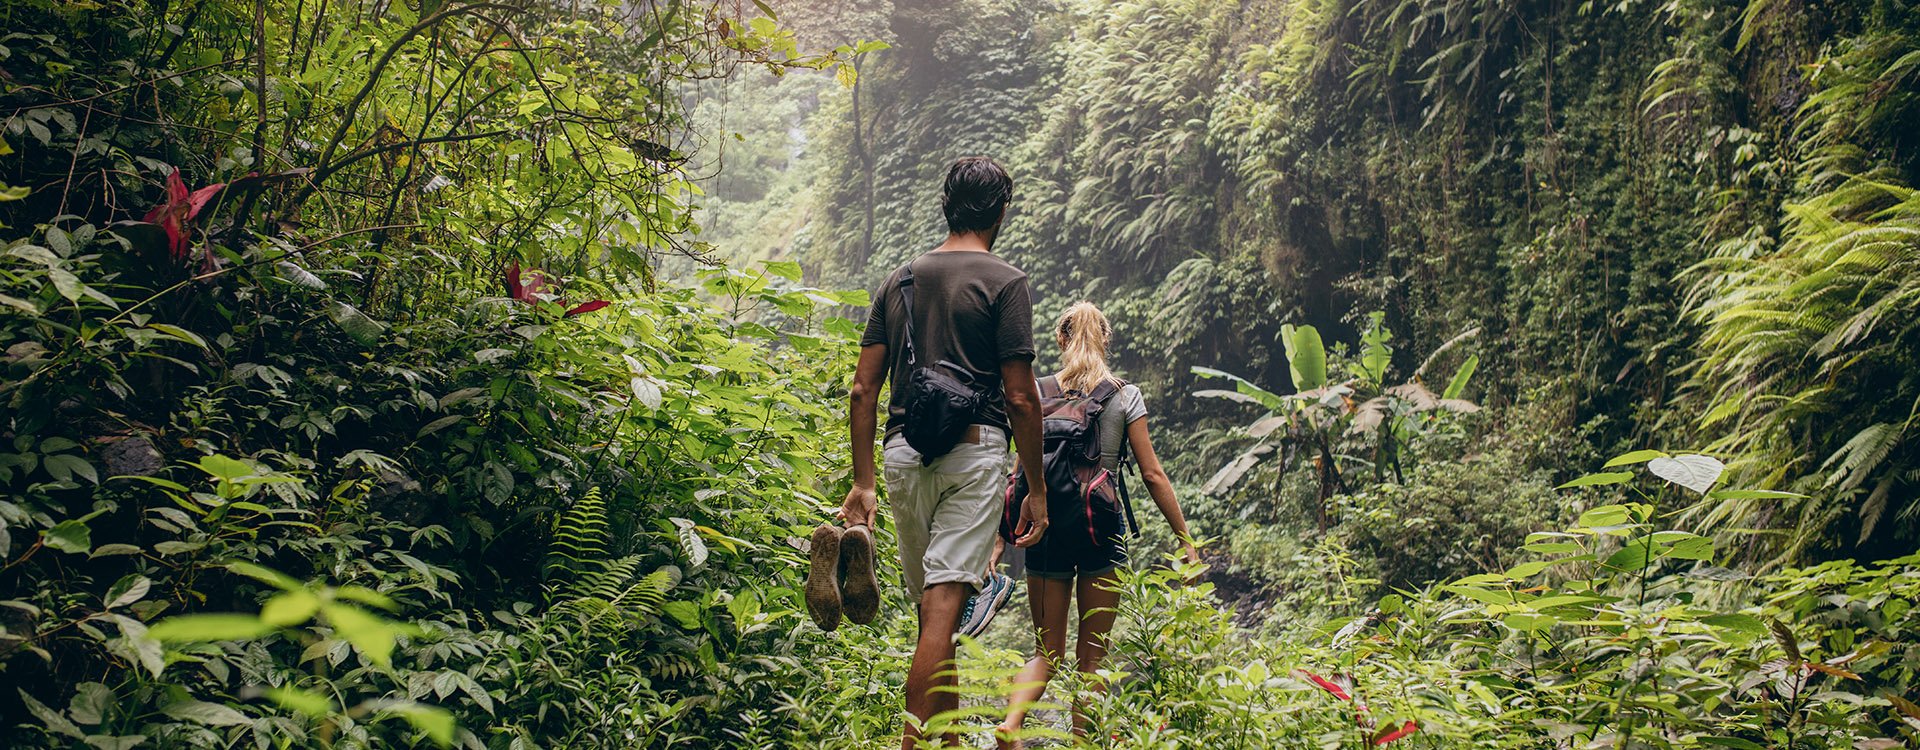 Couple hiking in jungle